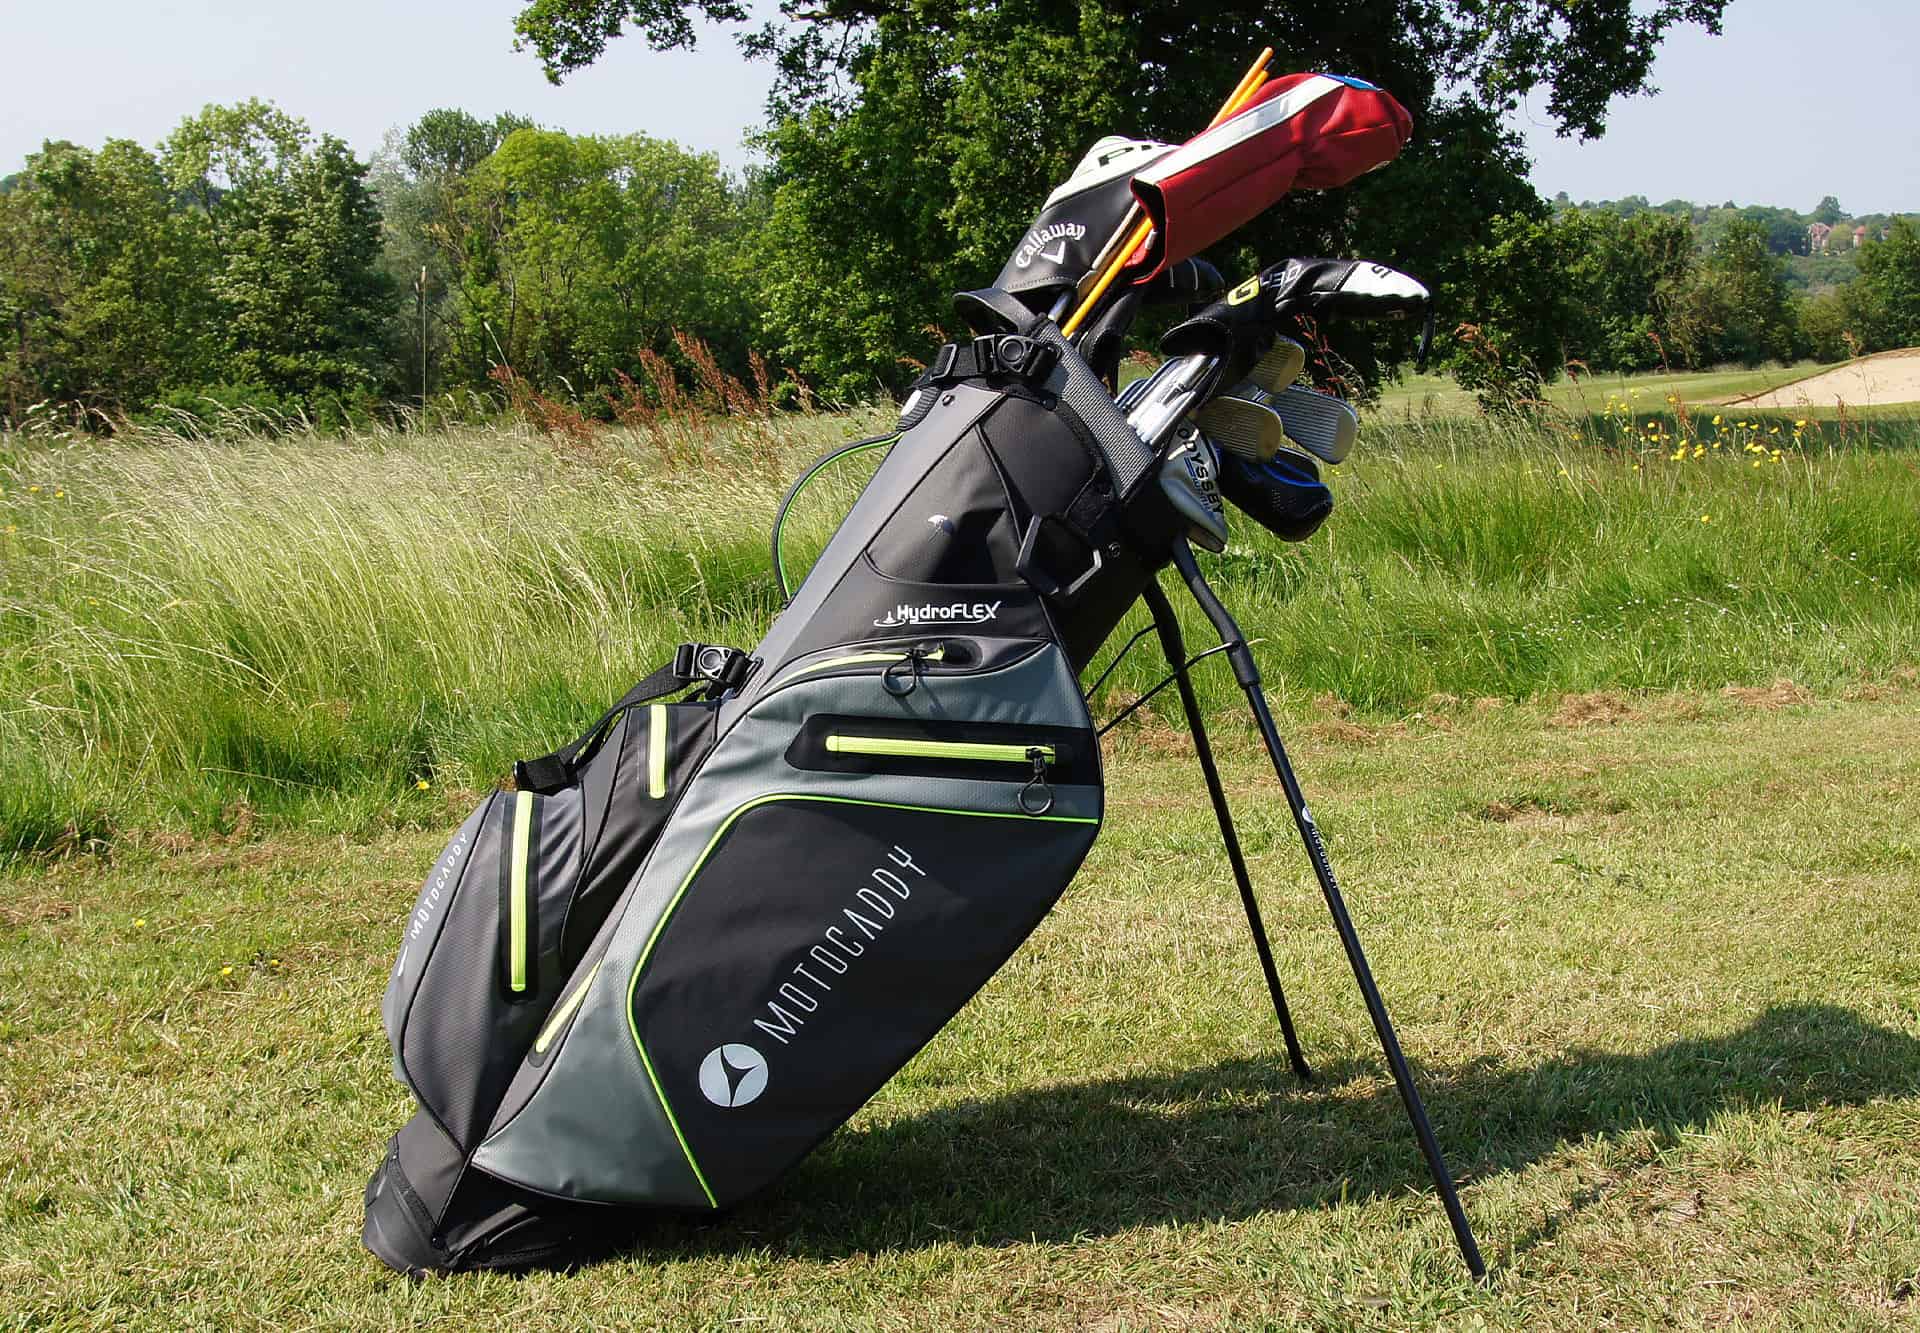 Motocaddy Hydroflex Waterproof Stand Bag Review